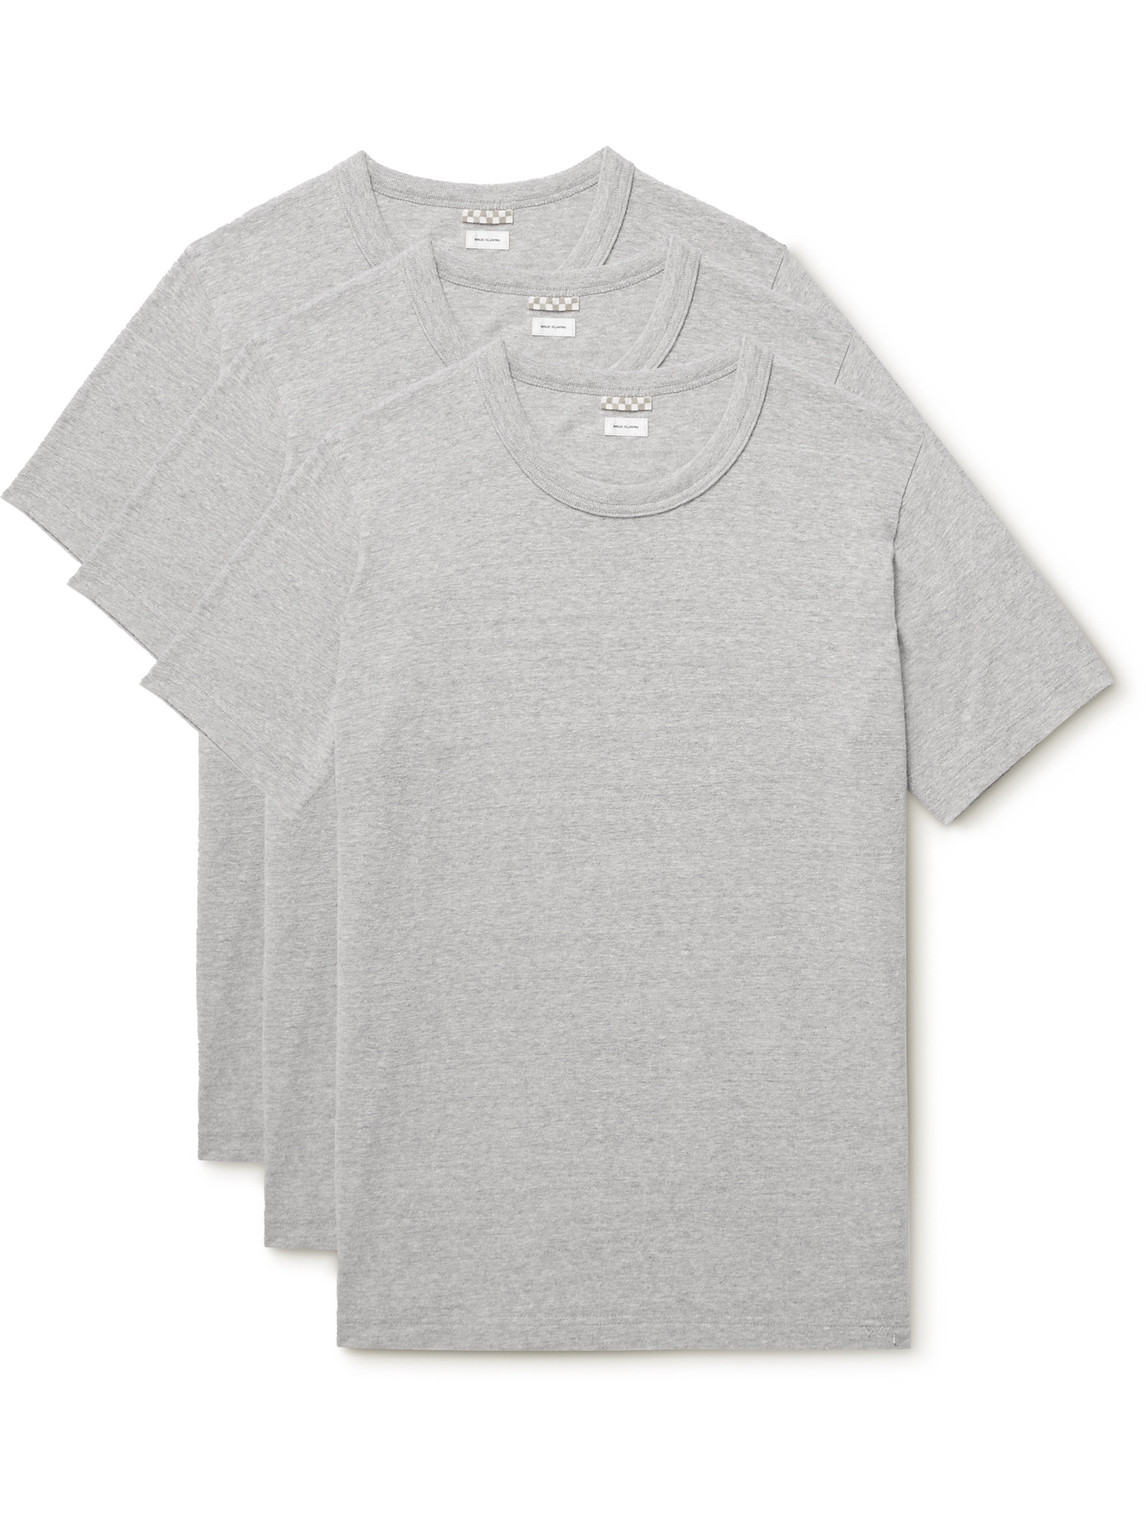 Sublig Three-Pack Cotton-Jersey T-Shirts